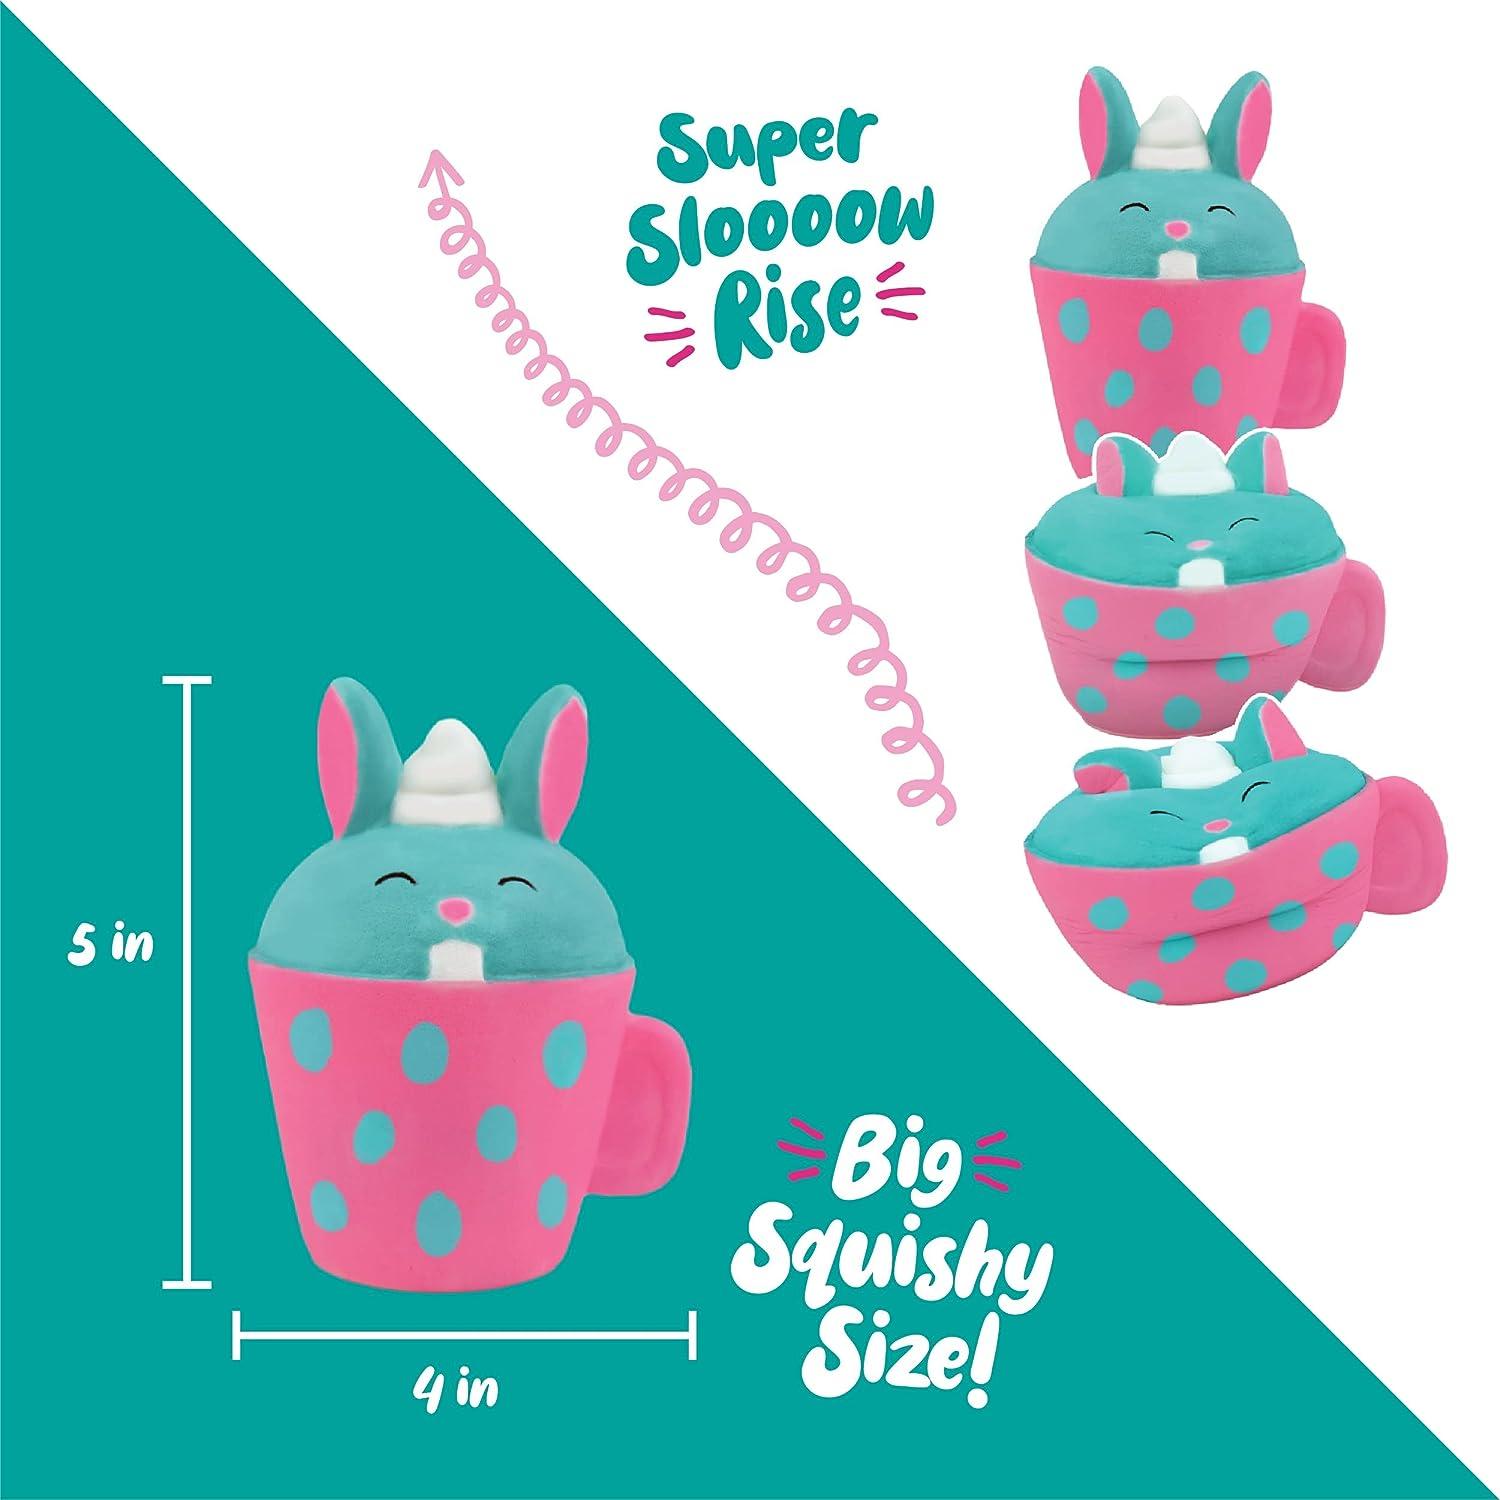  DOODLE HOG Squishy Craft Kit, Make Your Own Squishies, Paint  Squishy Toys